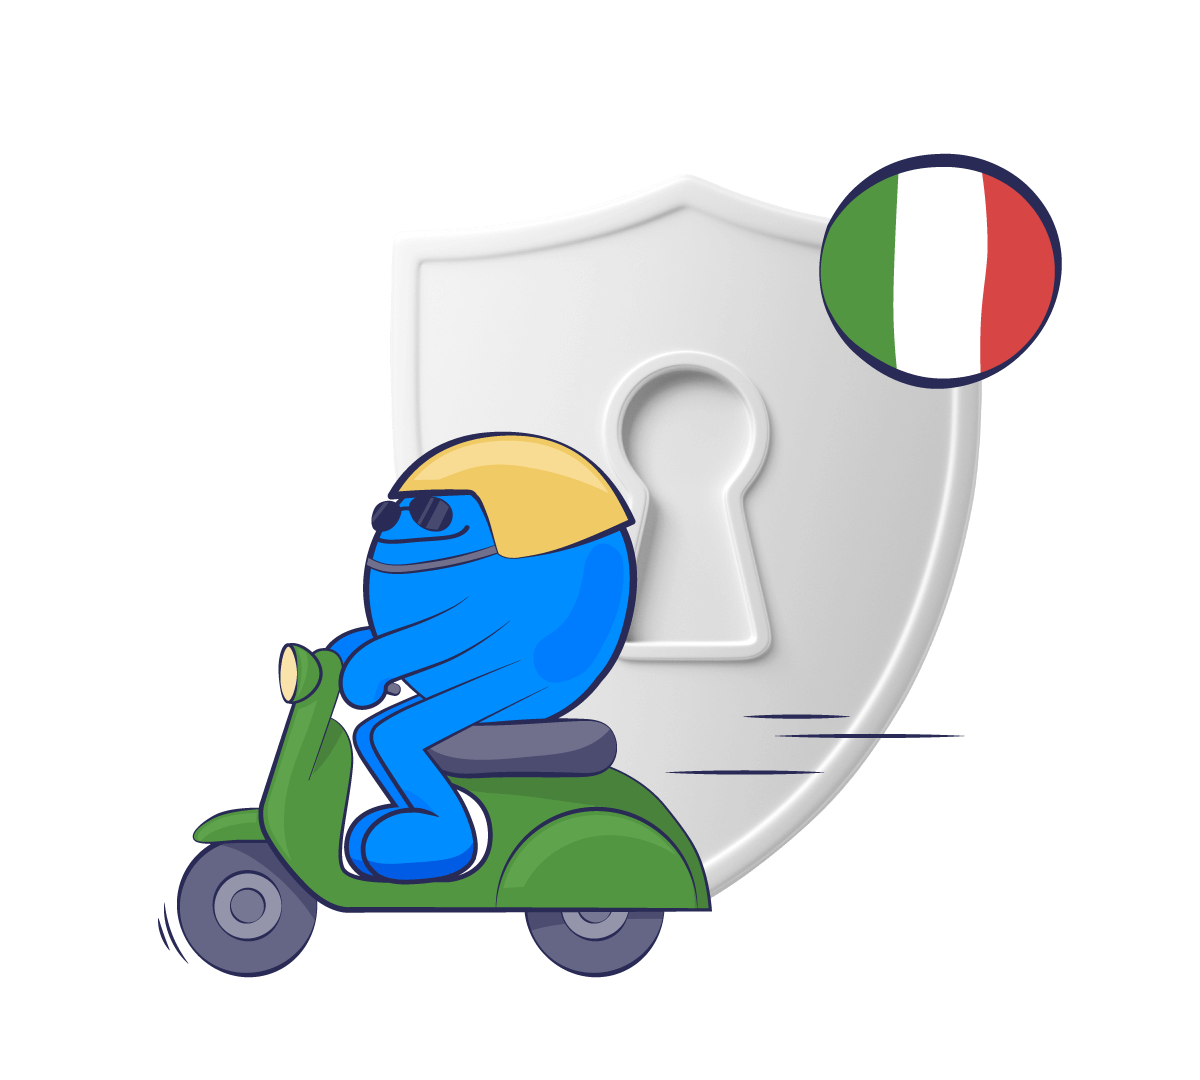 Ciao! Celebrate life with VPN Italy